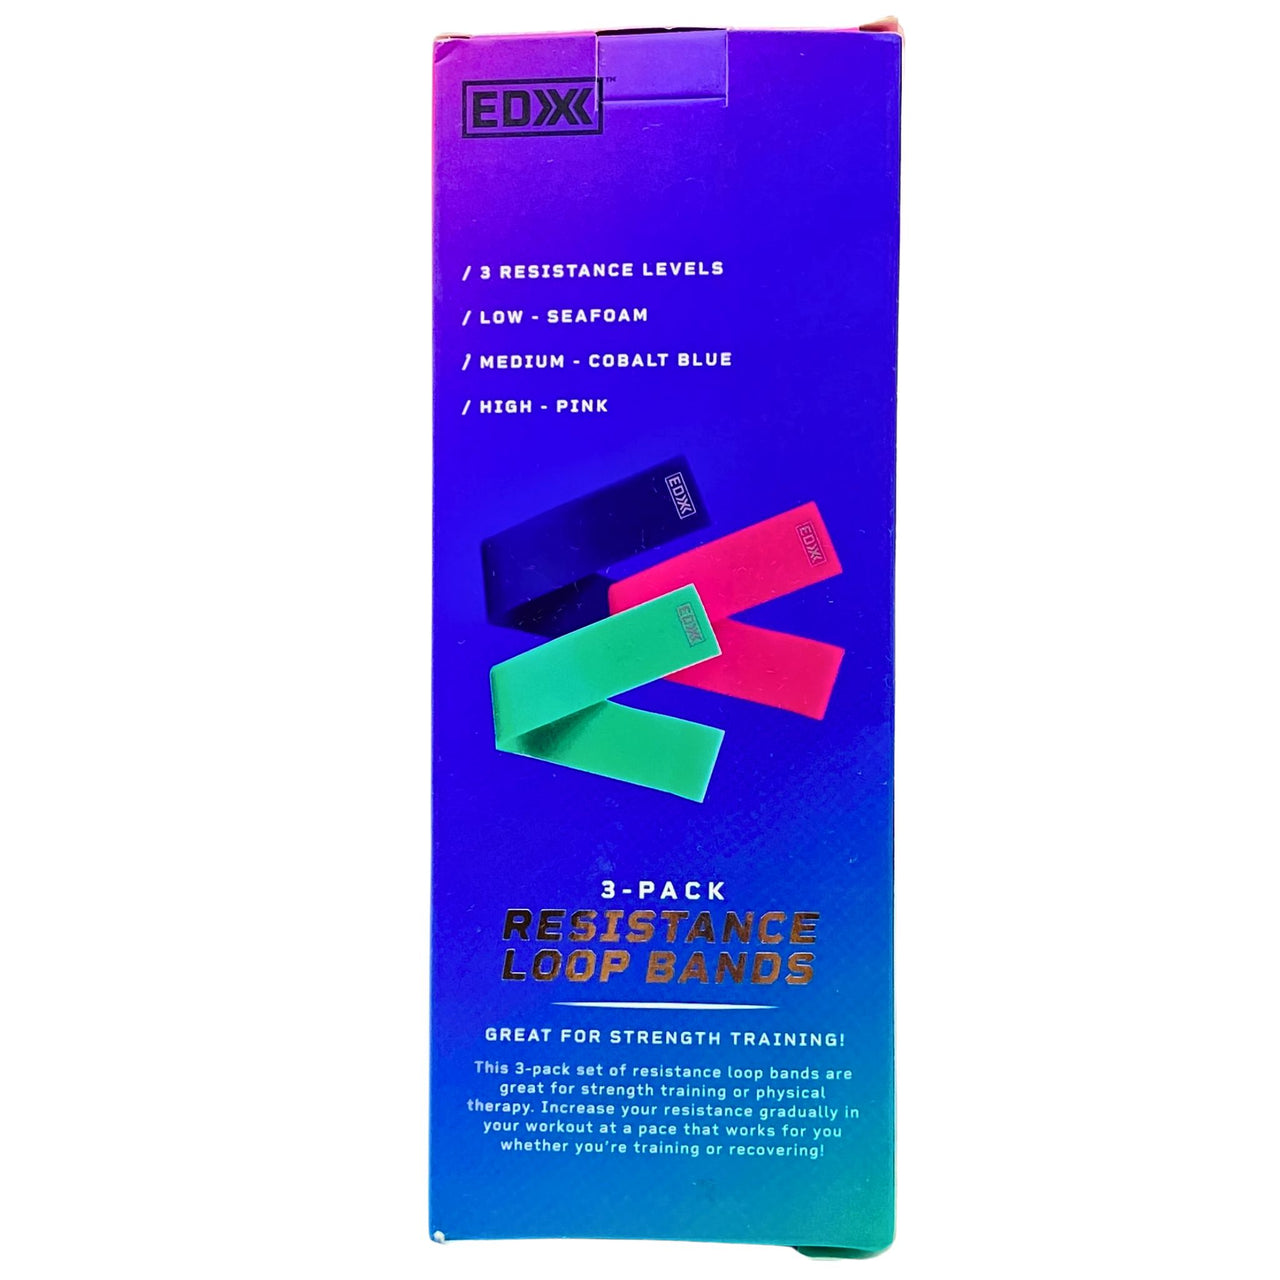 EDX 3-Pack Resistance Loop Bands Three Levels Low,Medium and High